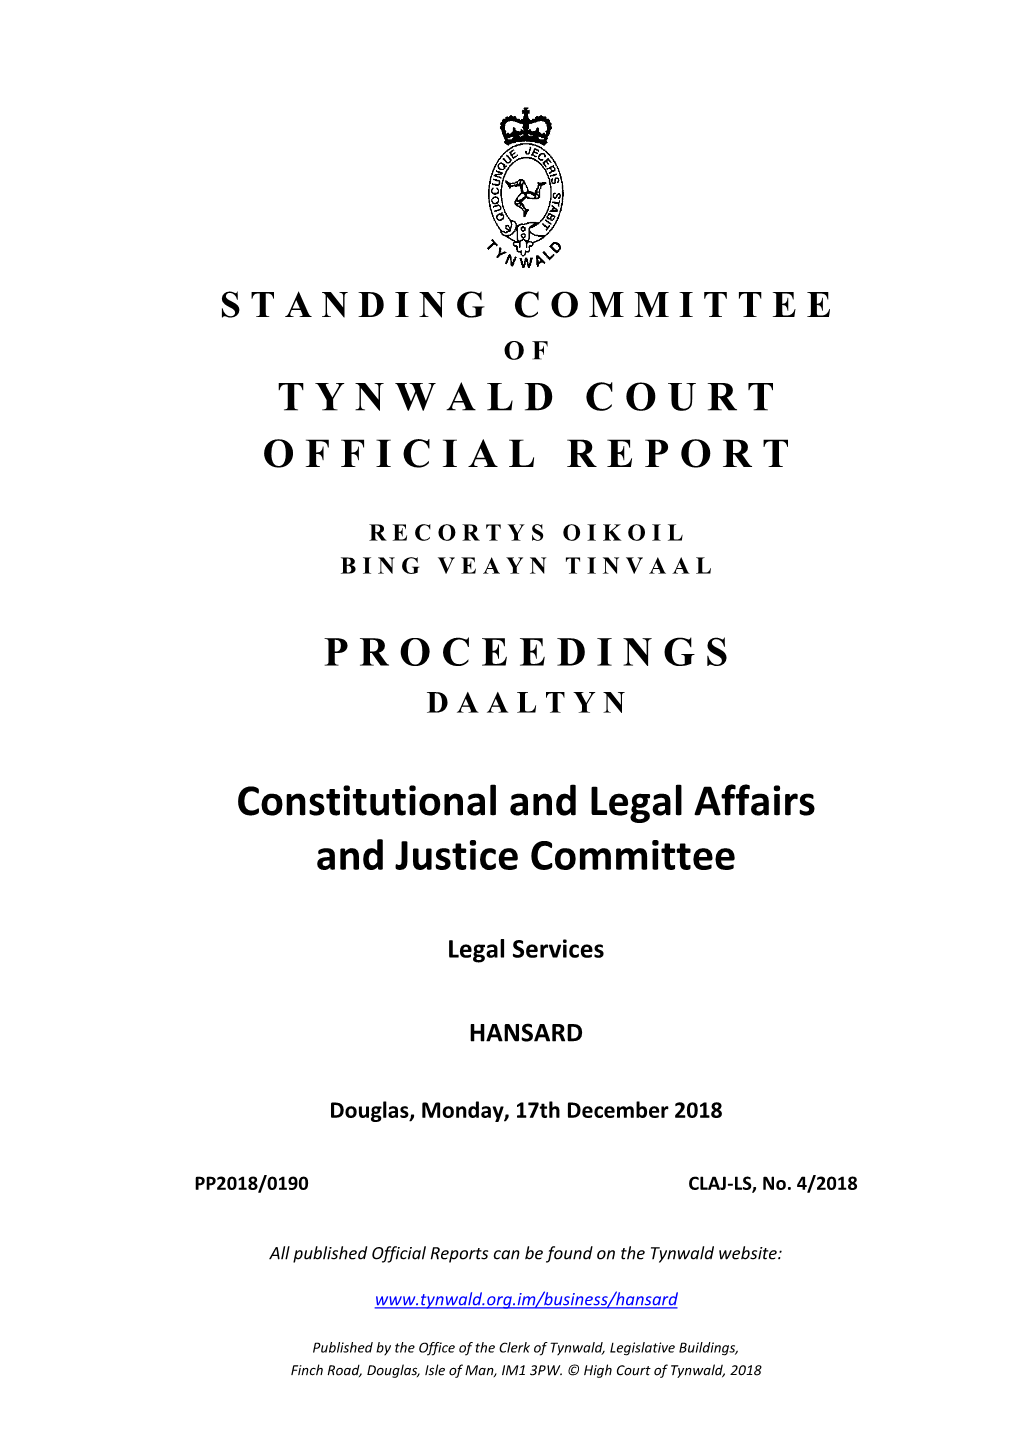 Constitutional and Legal Affairs and Justice Committee